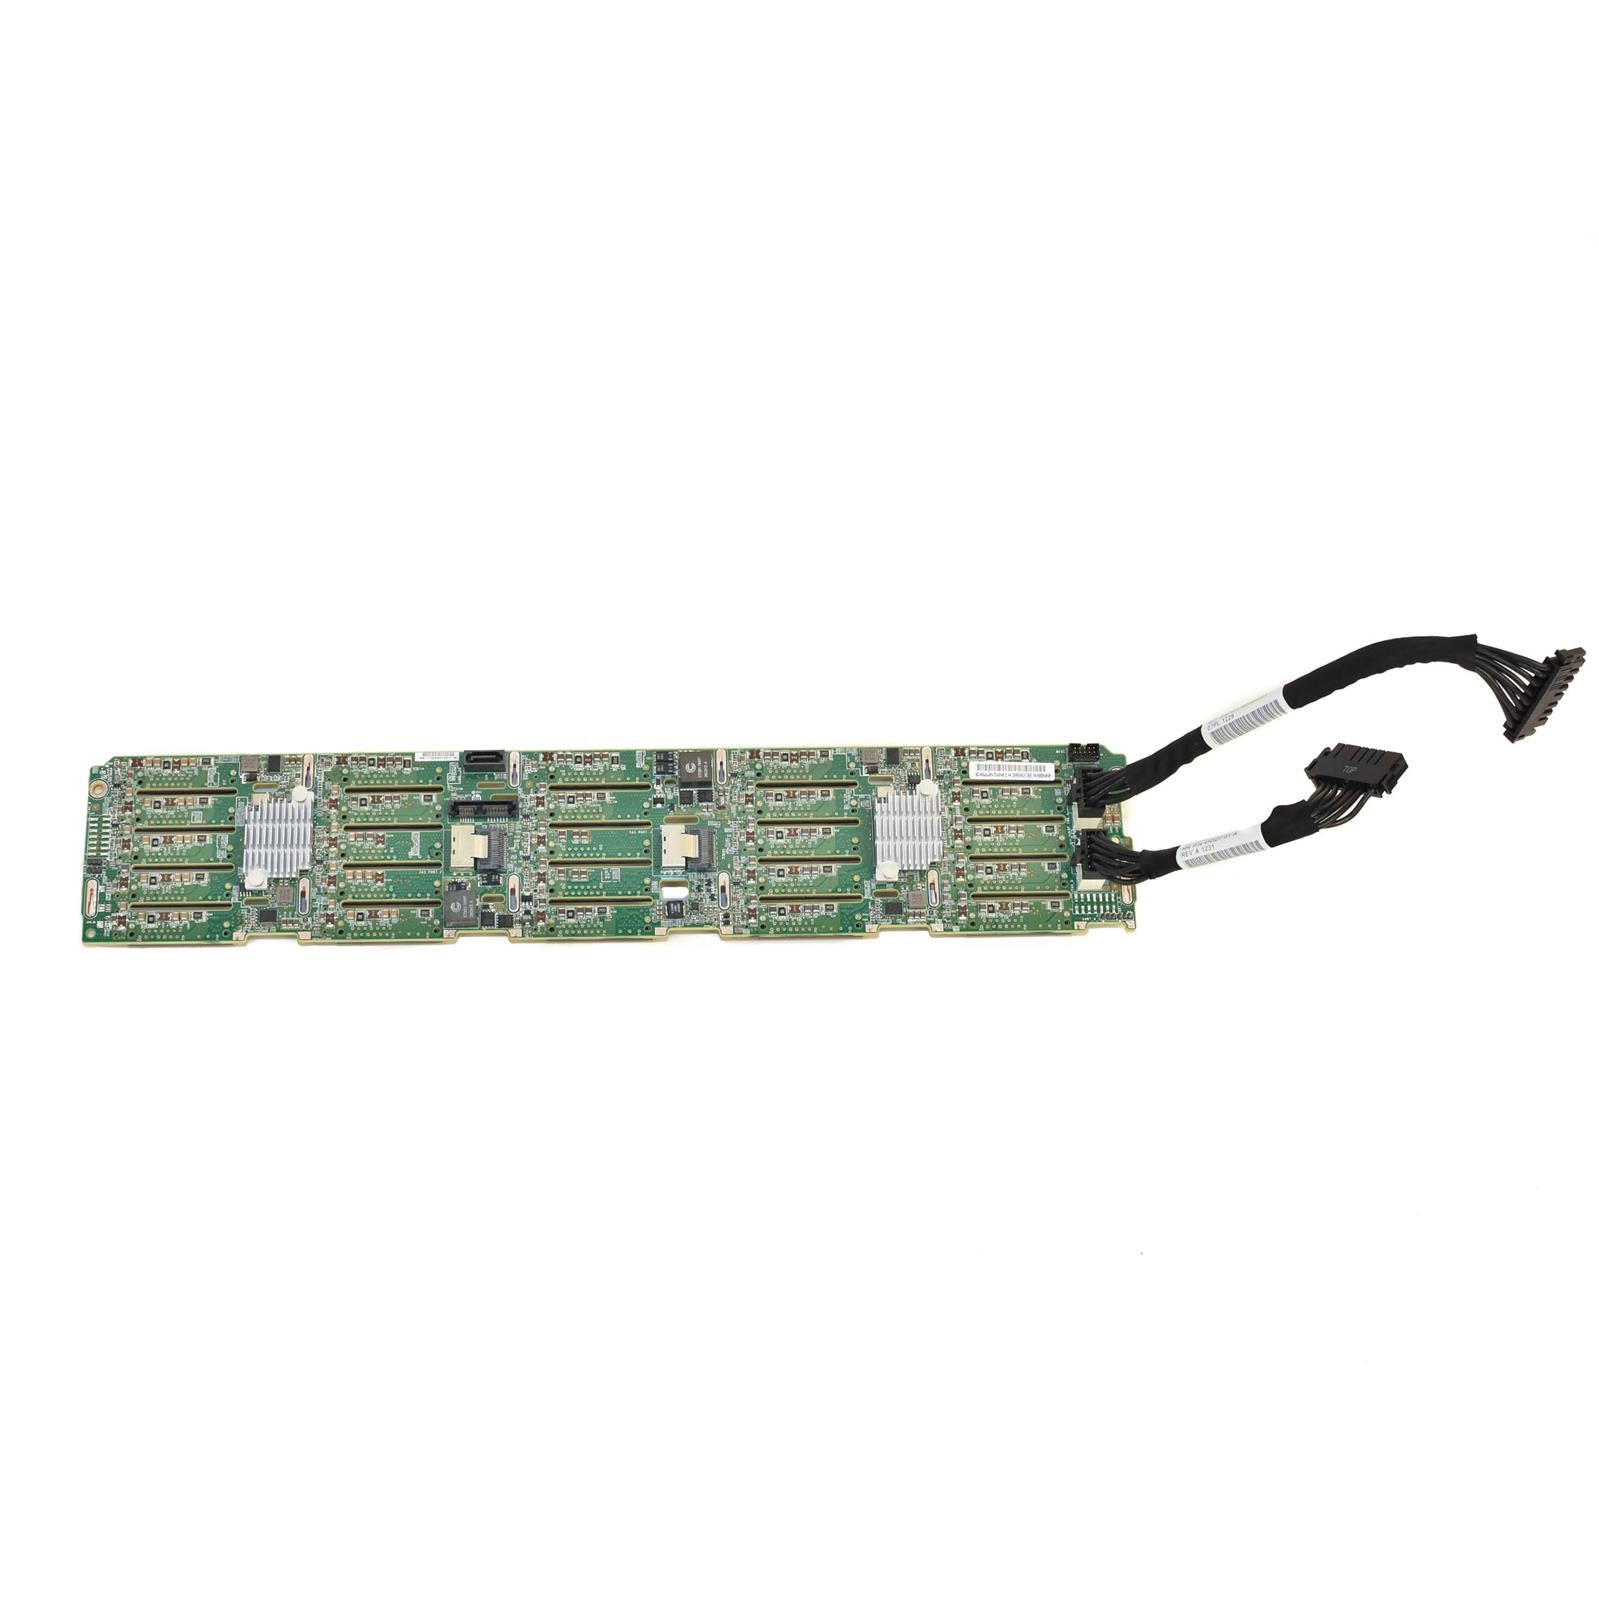 Genuine HP Proliant DL380p DL385p G8 SAS Drive Backplane 643705-001 Tested Grd A 